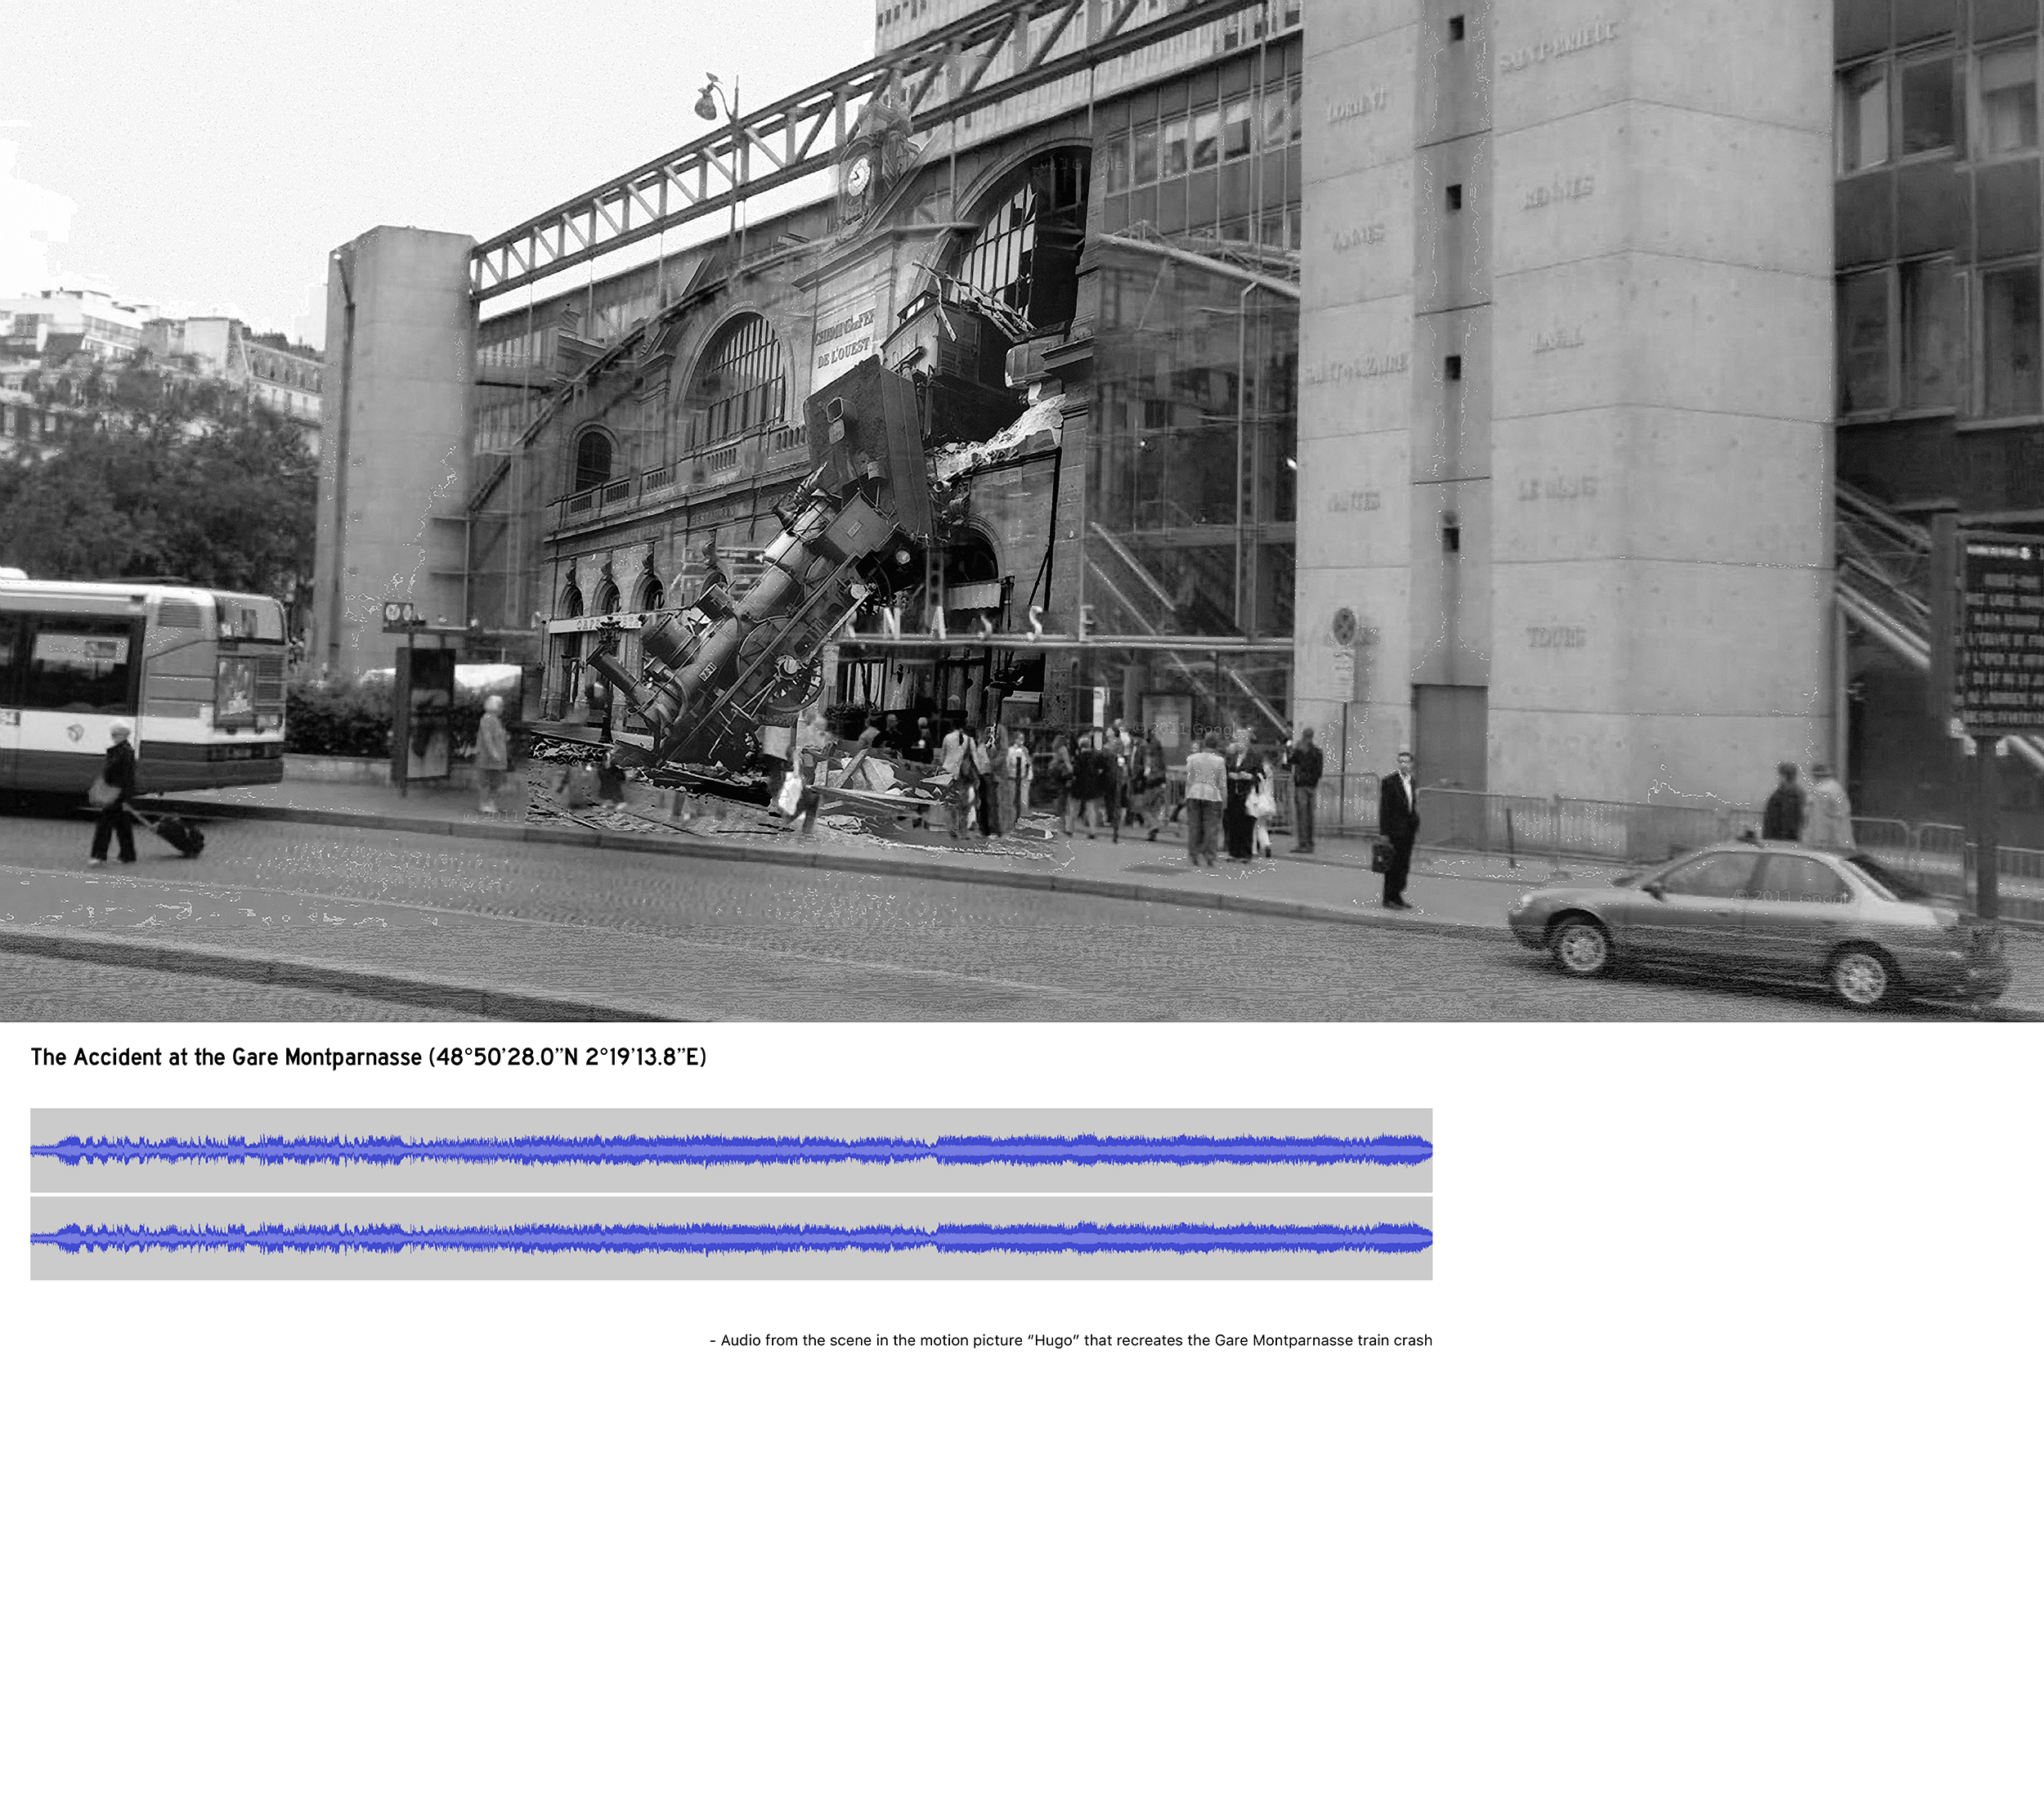 The Accident at the Gare Montparnasse (48°50’28.0″N 2°19’13.8″E)